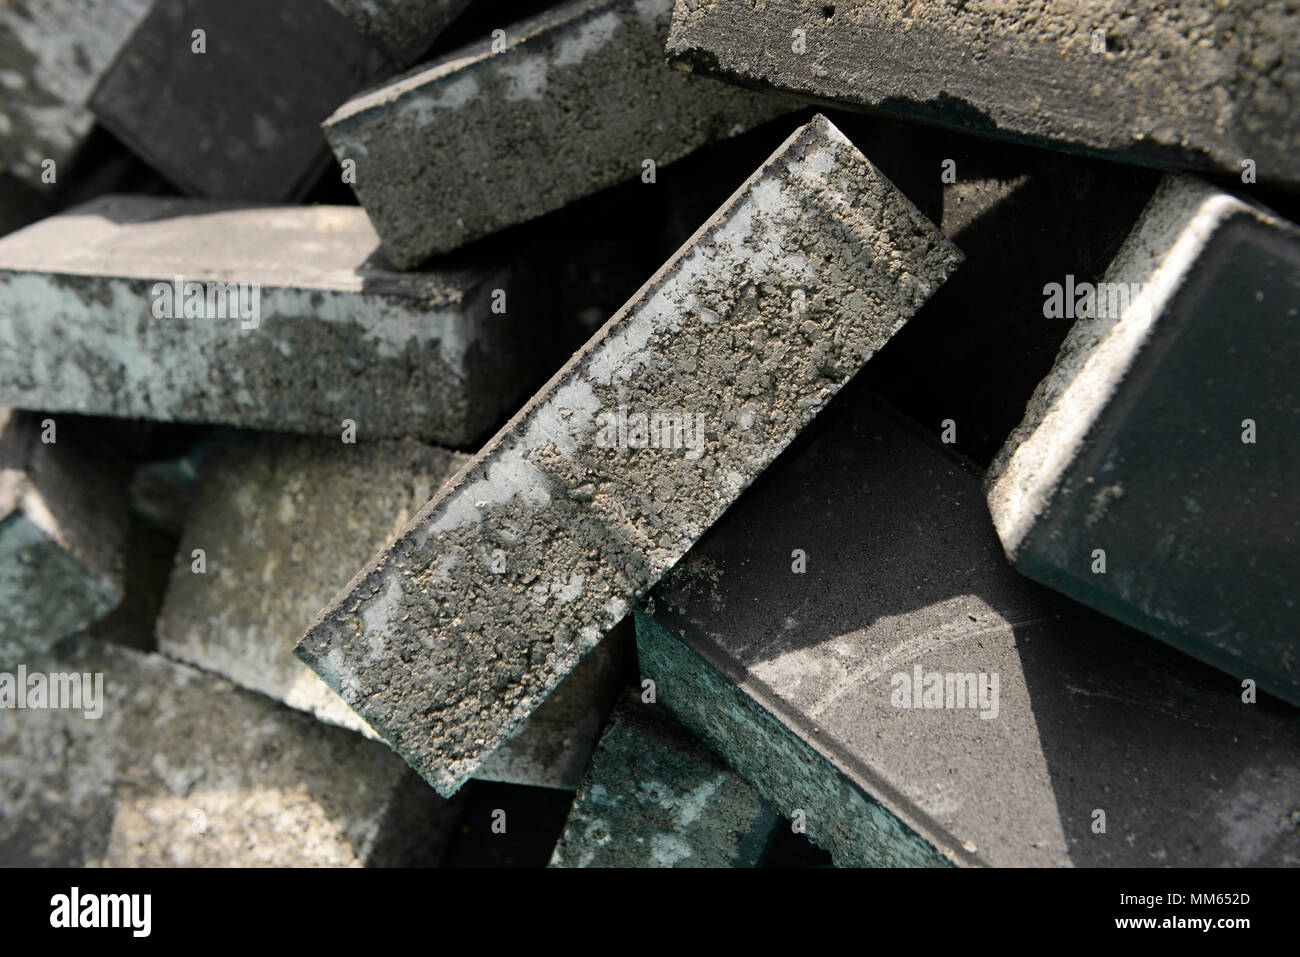 Paving bricks in a pile ready for laying in Chaoyang district, Beijing, China Stock Photo